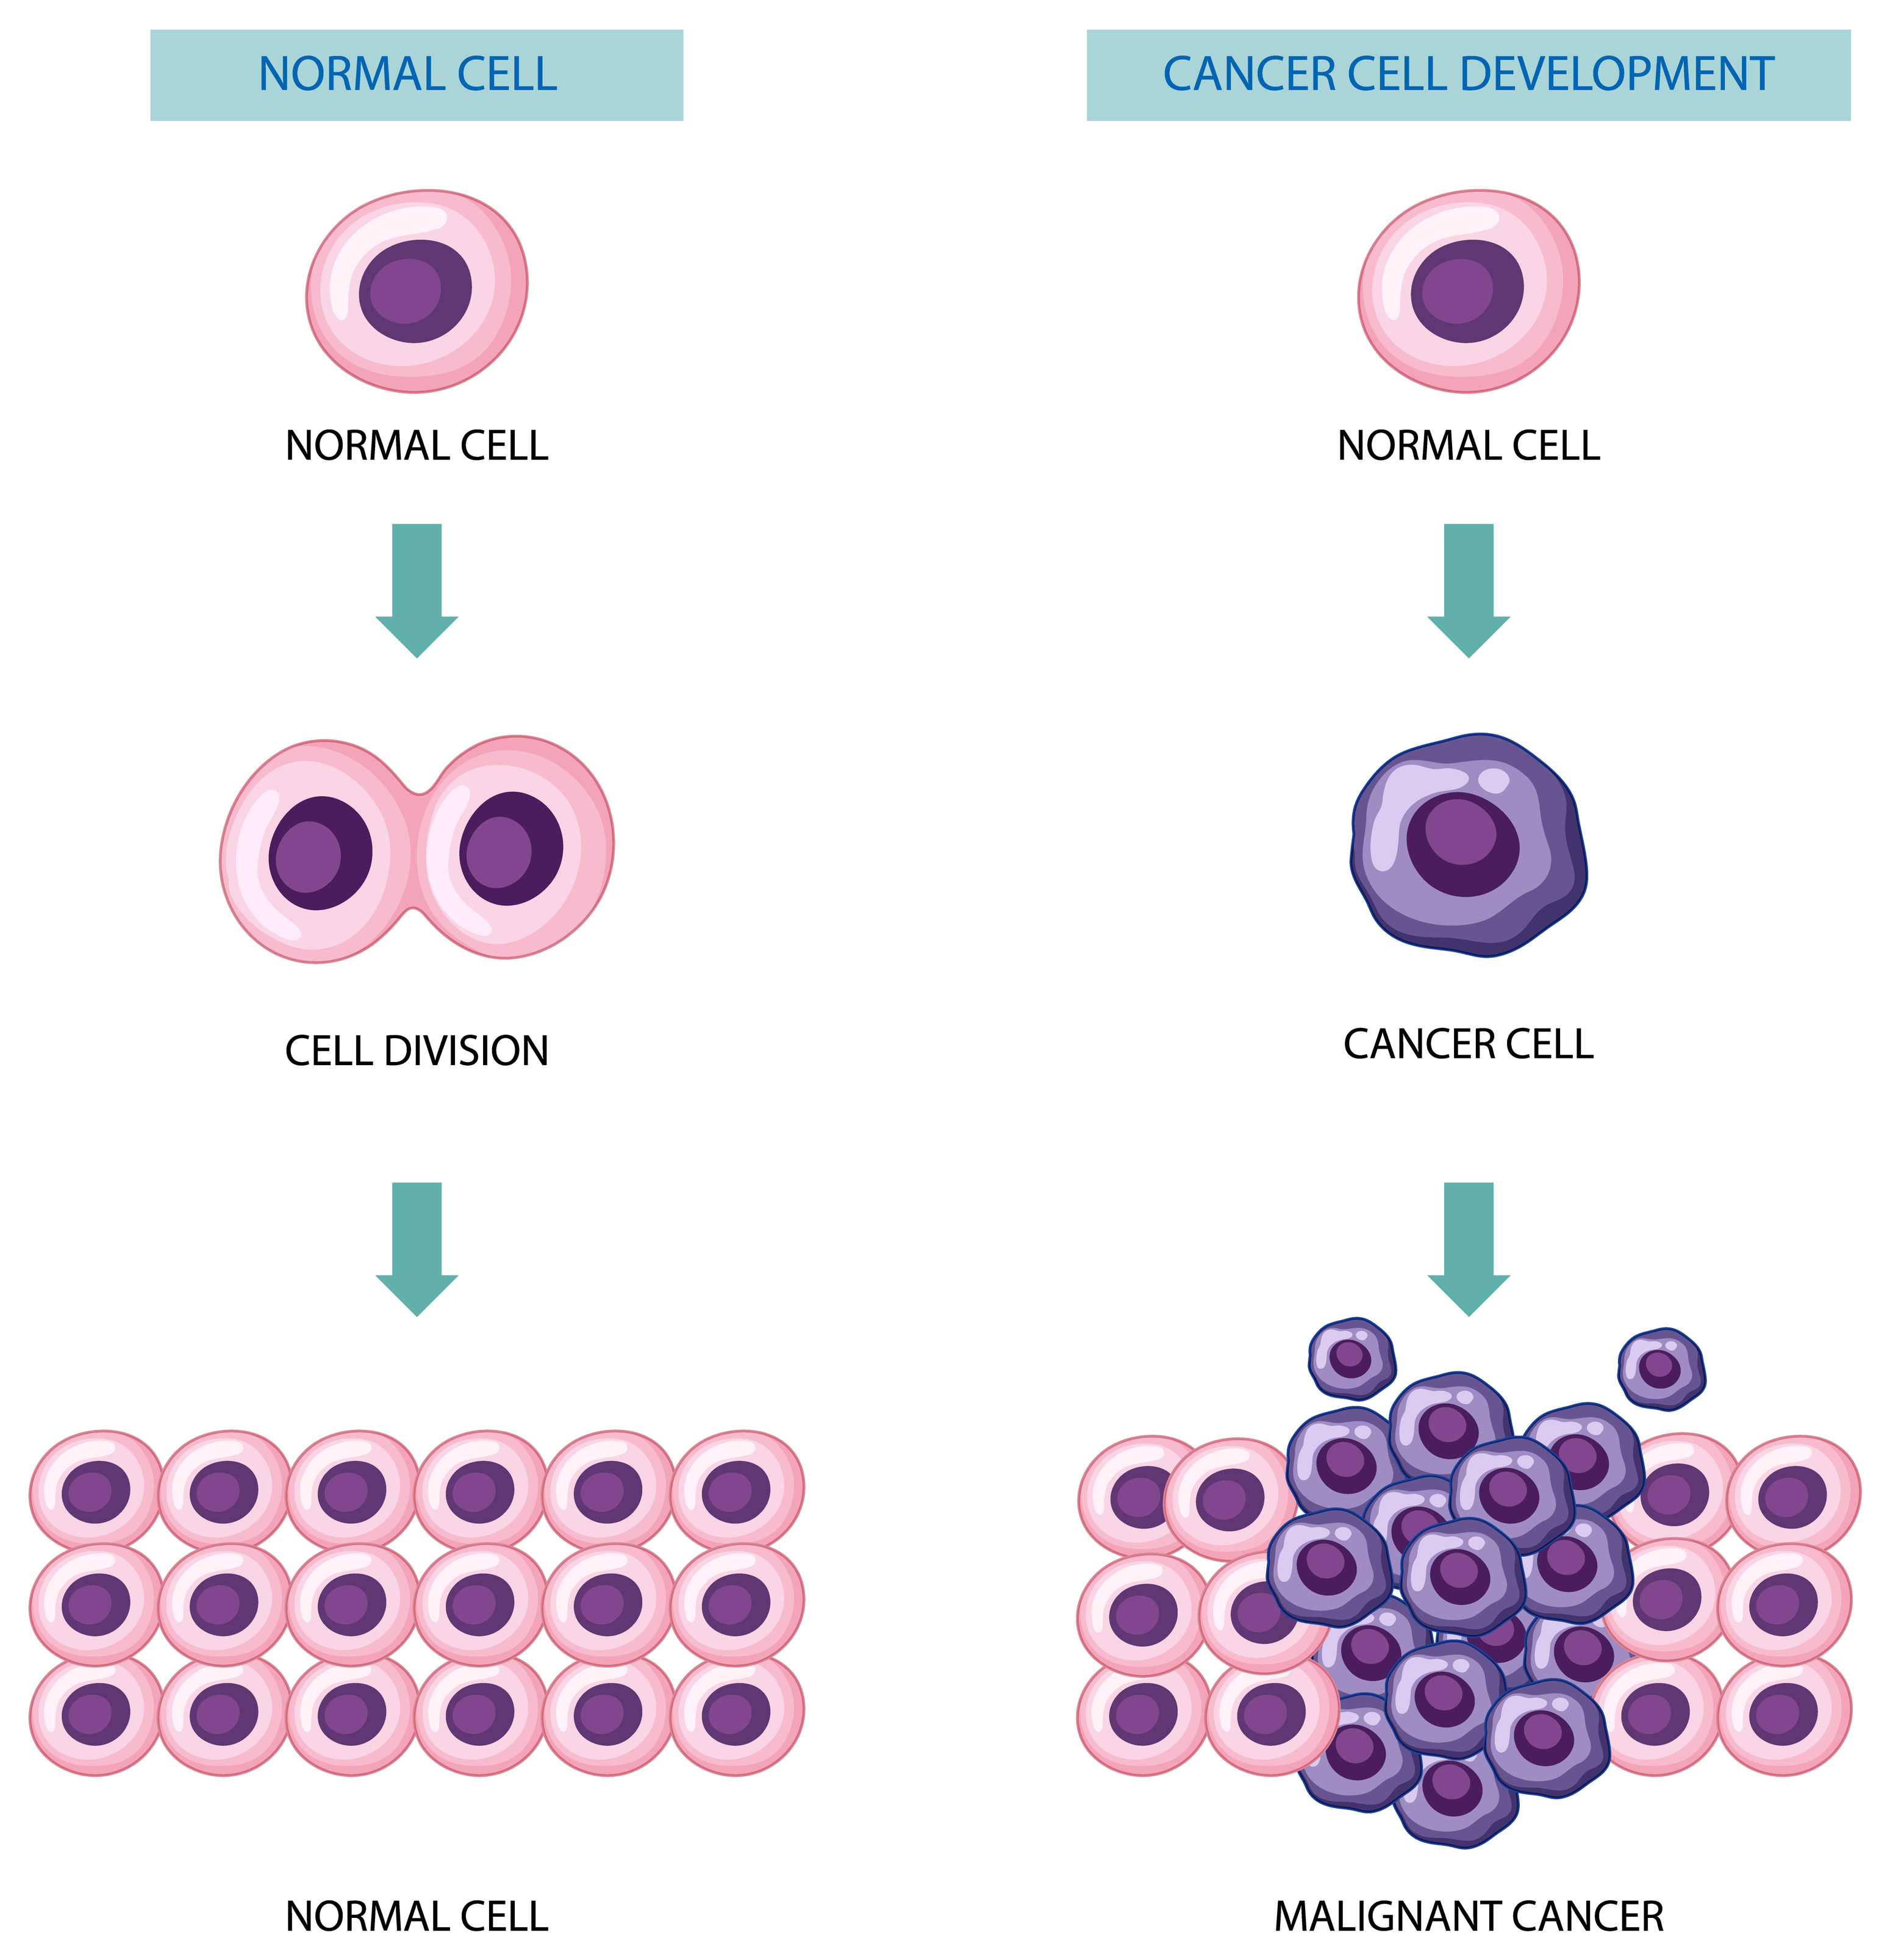 Illustration of a normal cell and a cancer cell